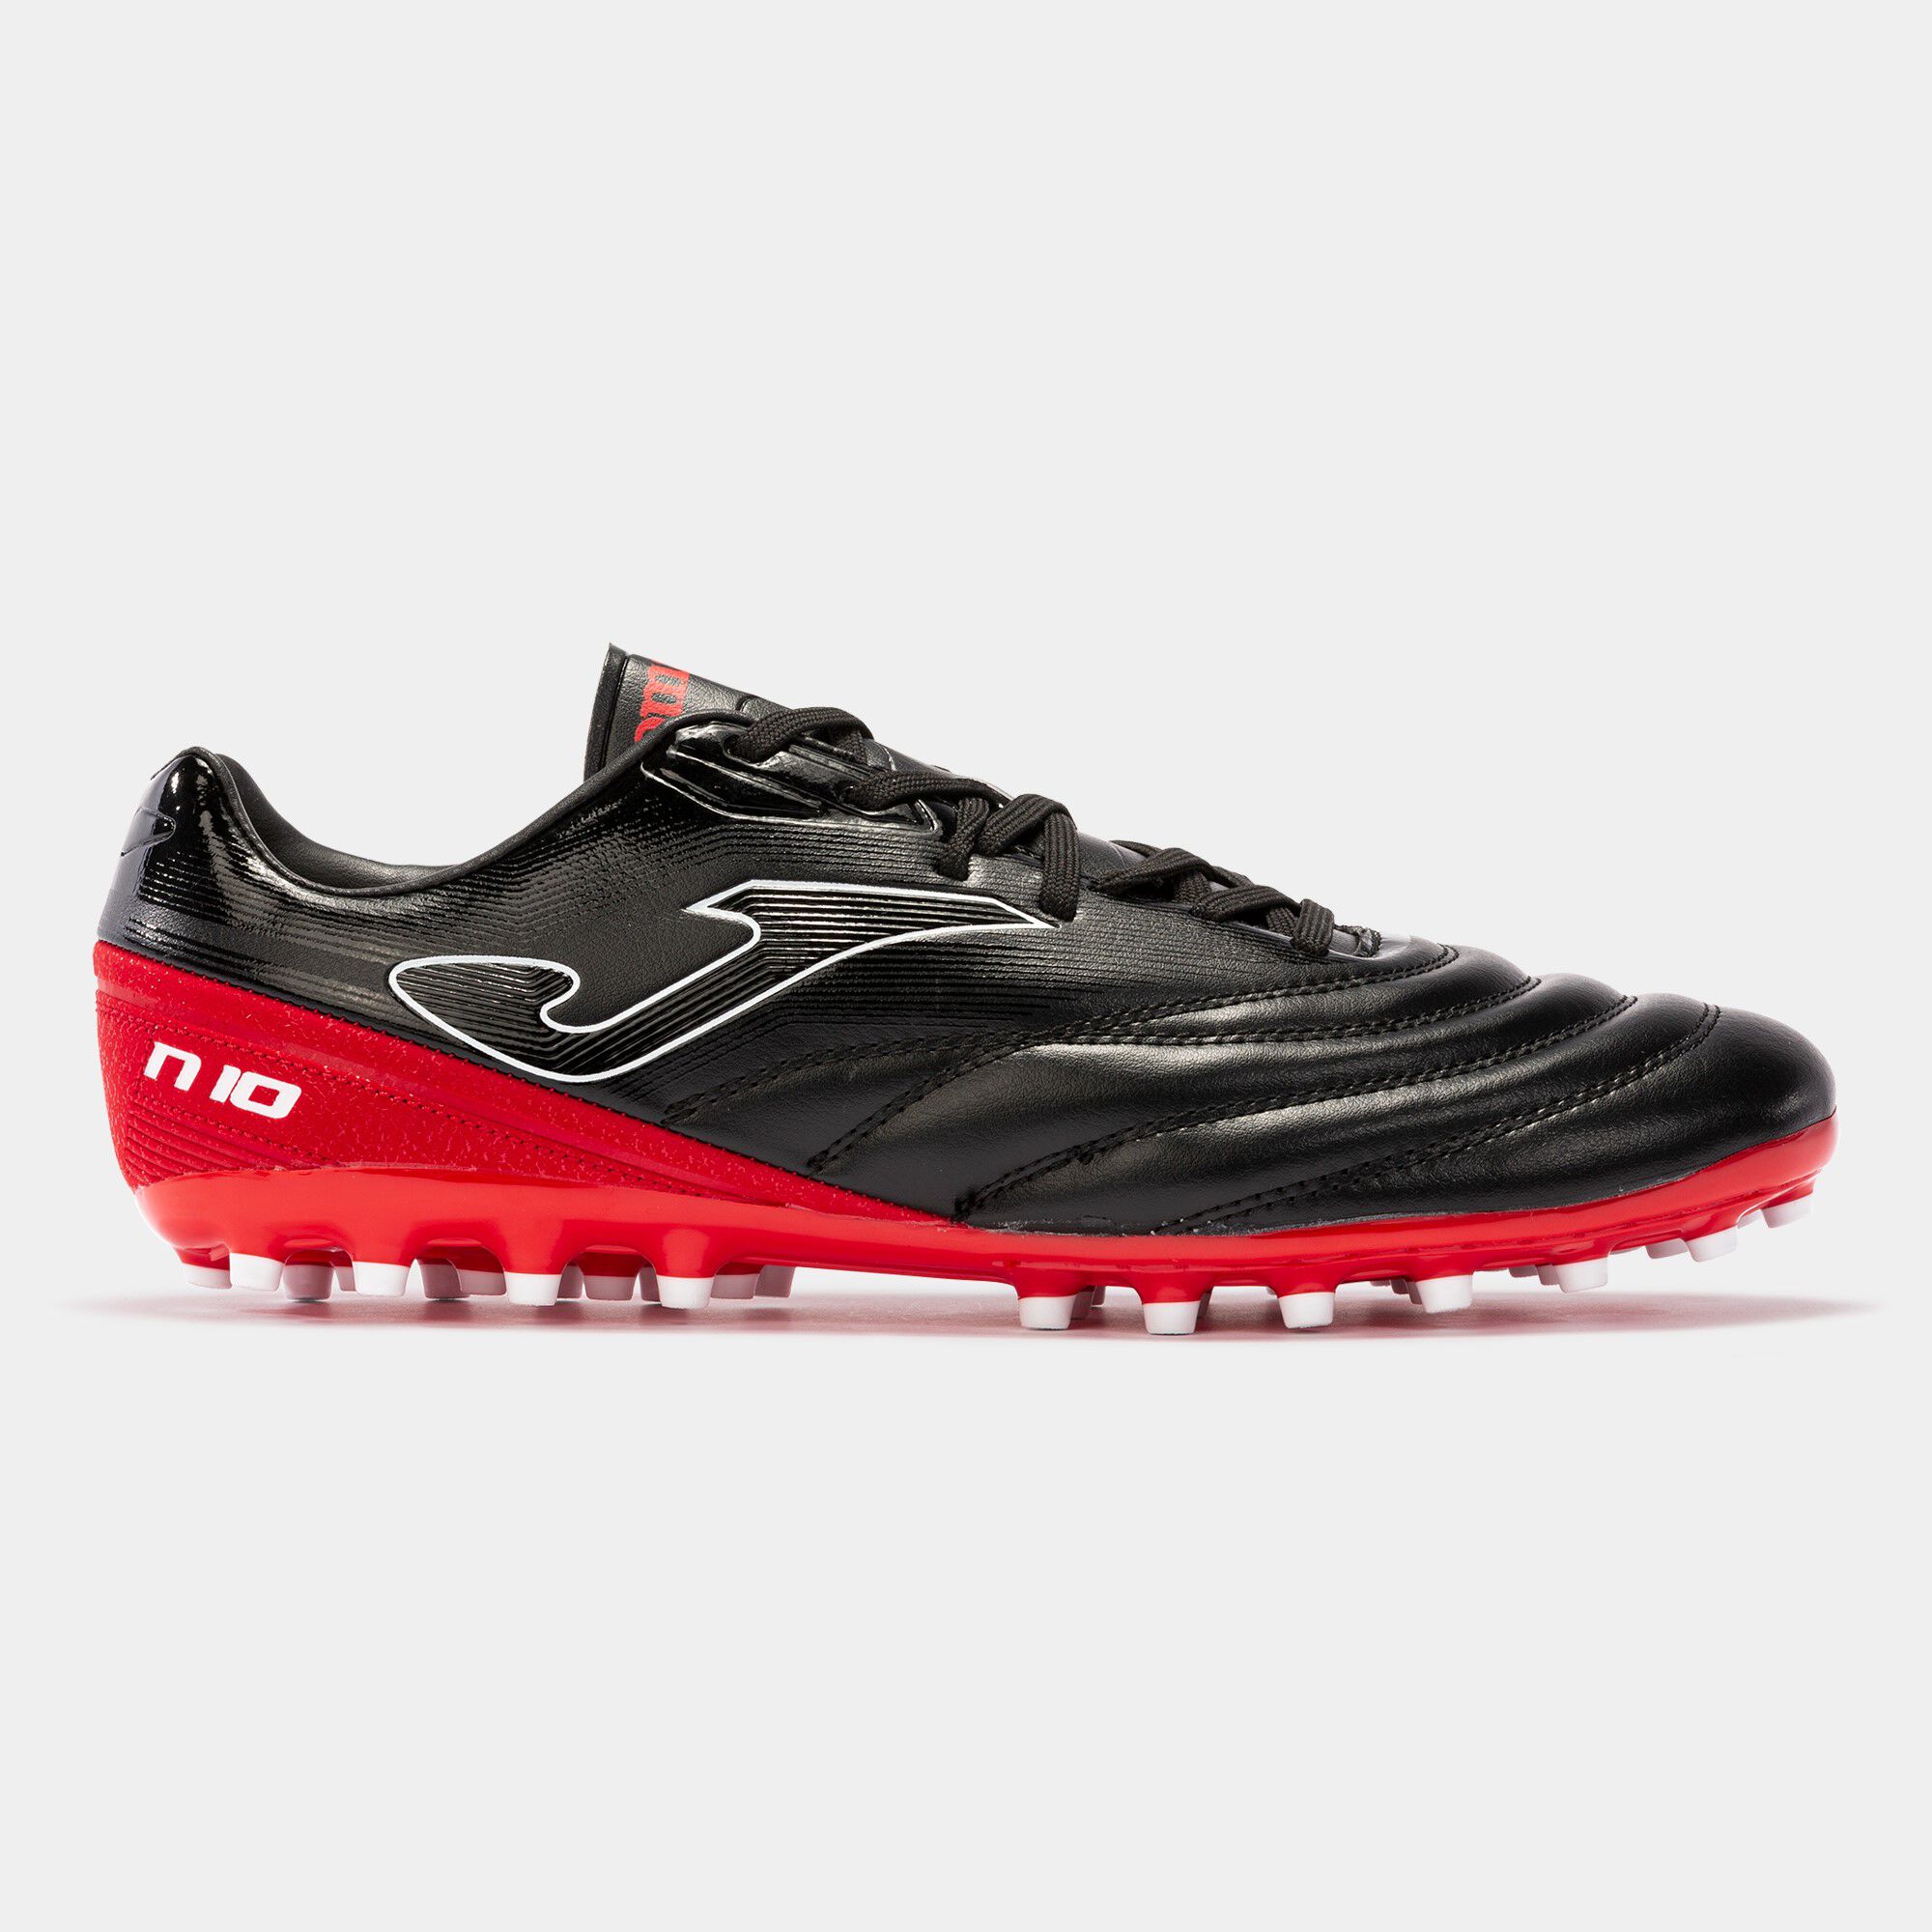 CHAUSSURES FOOTBALL N-10 22 GAZON SYNTHÉTIQUE AG NOIR ROUGE